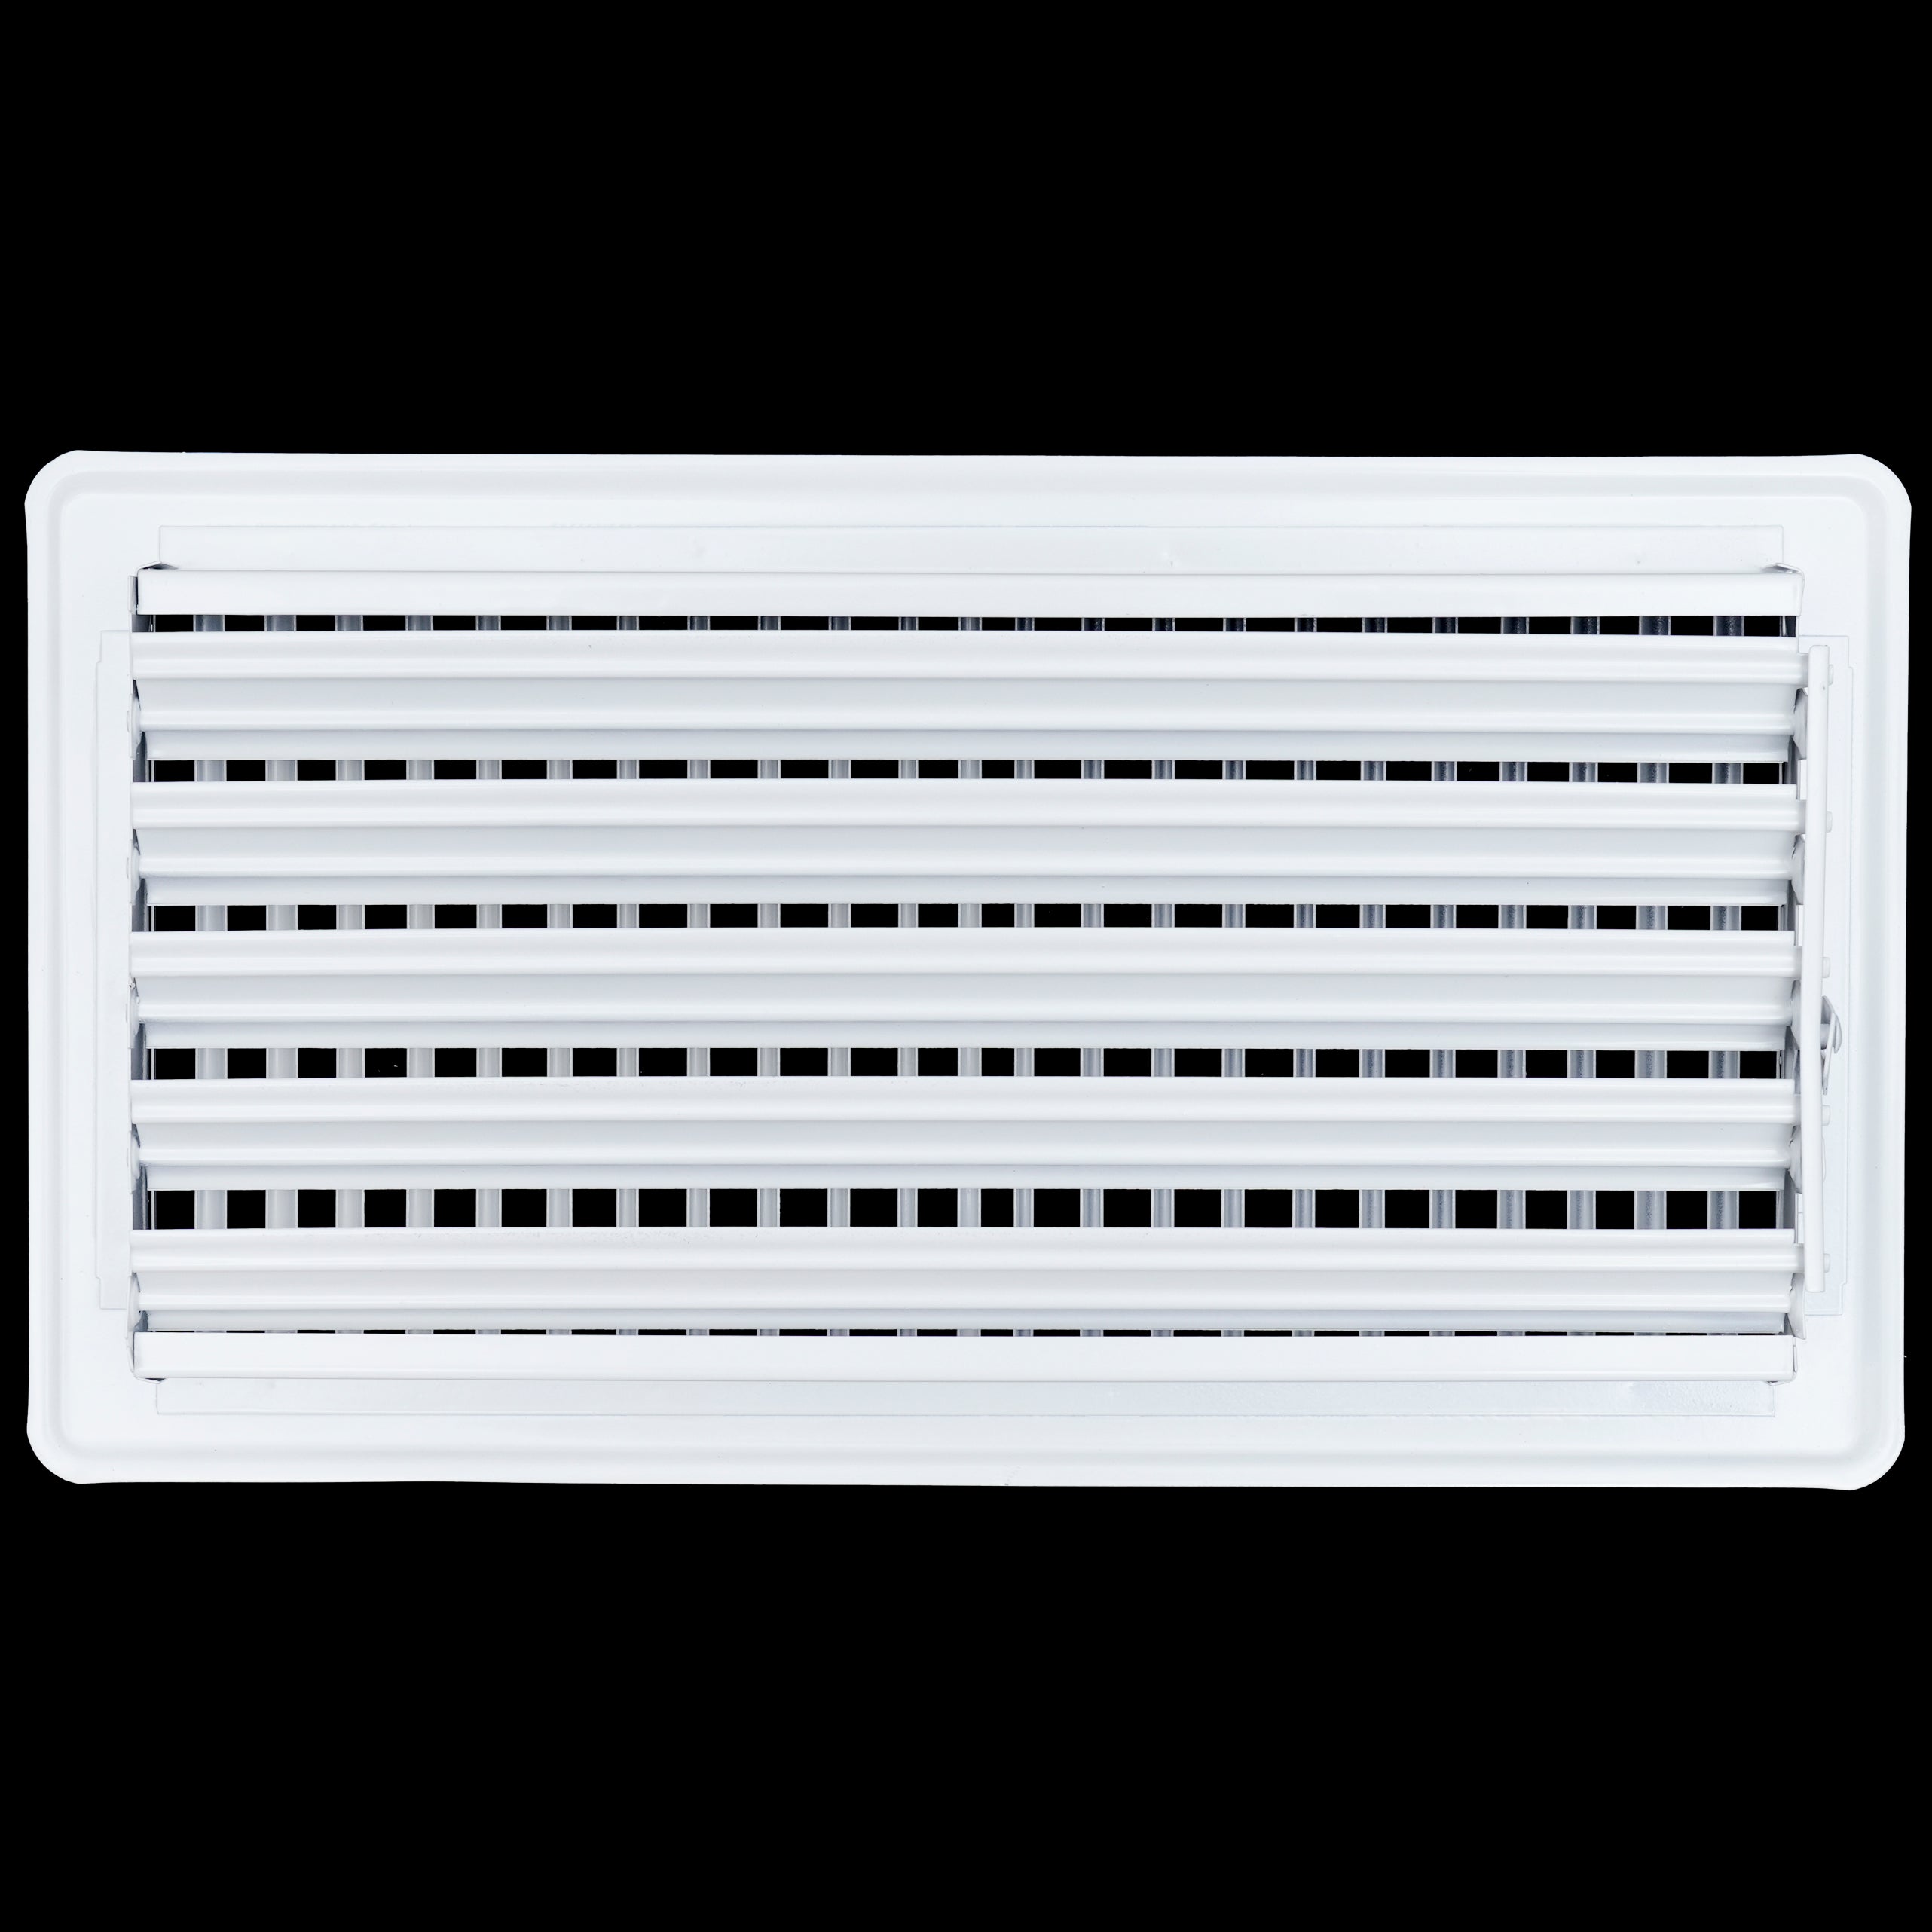 6" x 12"  Floor Register with Louvered Design | Heavy Duty Walkable Design with Damper | Floor Vent Grille | Easy to Adjust Air Supply lever | White